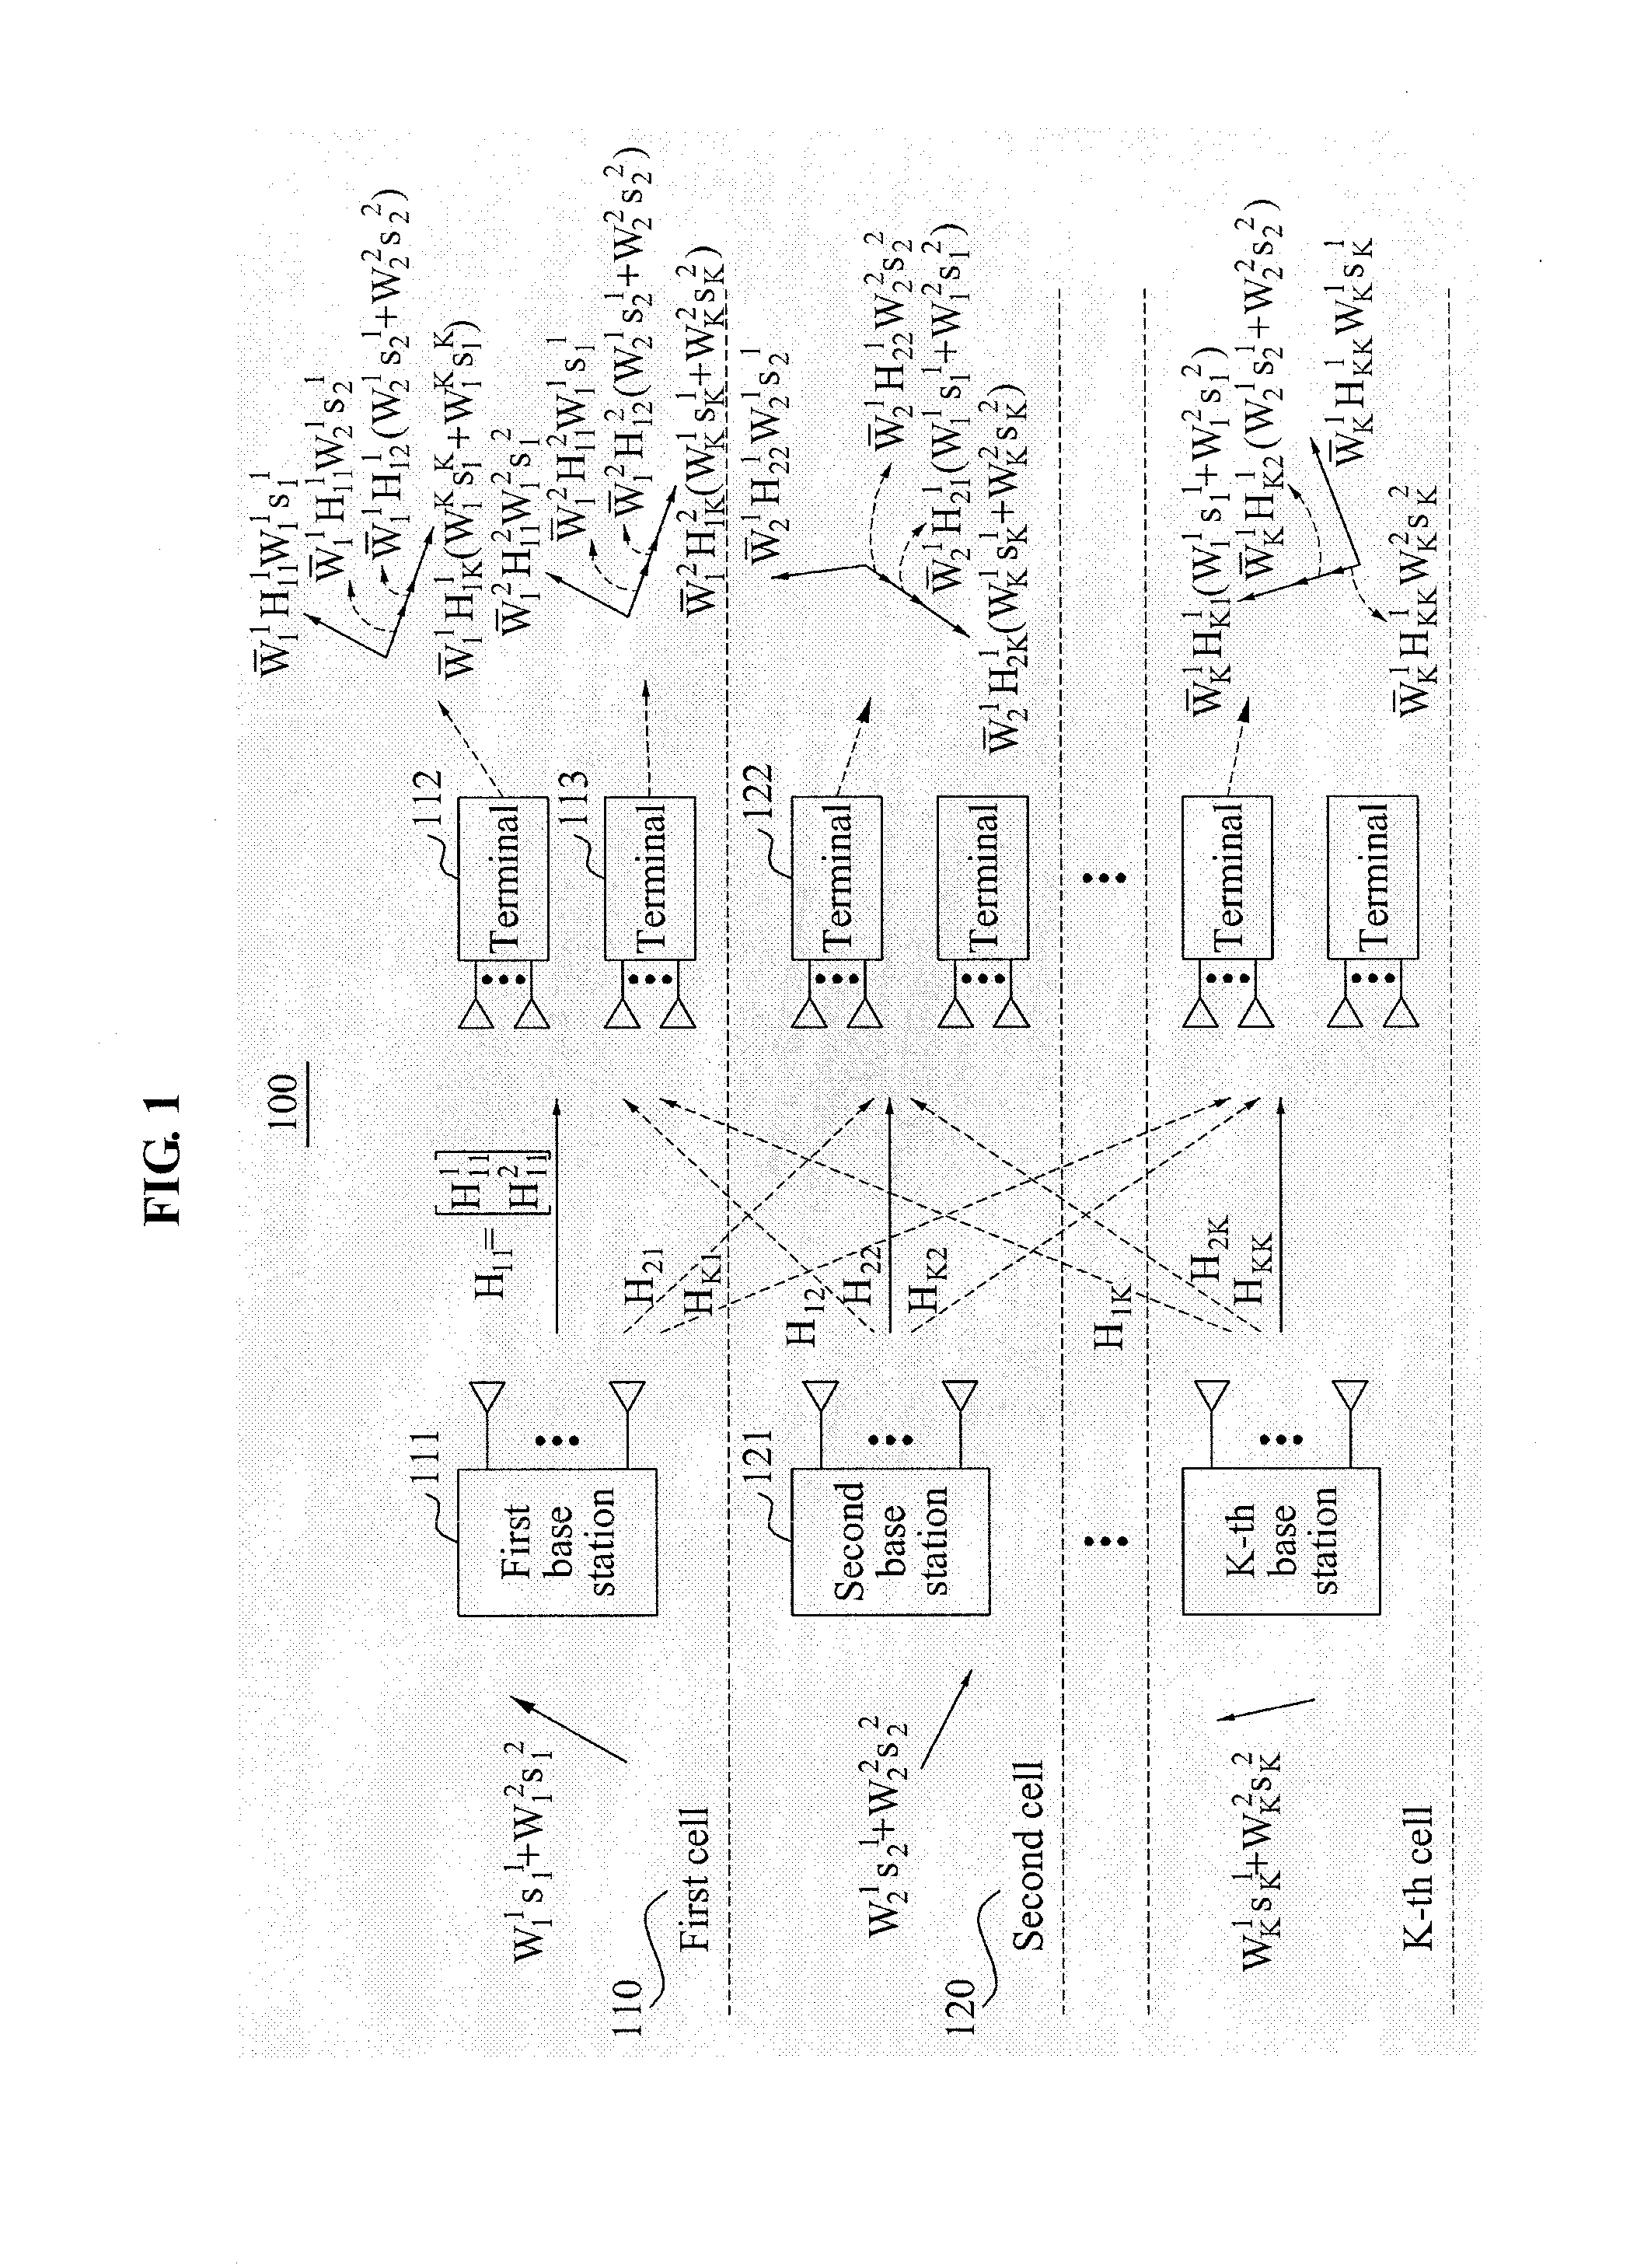 Method of communicating between base station and terminal based on interference alignment in multi-cell multi-user multiple-input multiple-output (MIMO) interference channel and method and apparatus of communication using interference alignment and block successive interference pre-cancellation in multi-user multiple-input multiple-output interference channel